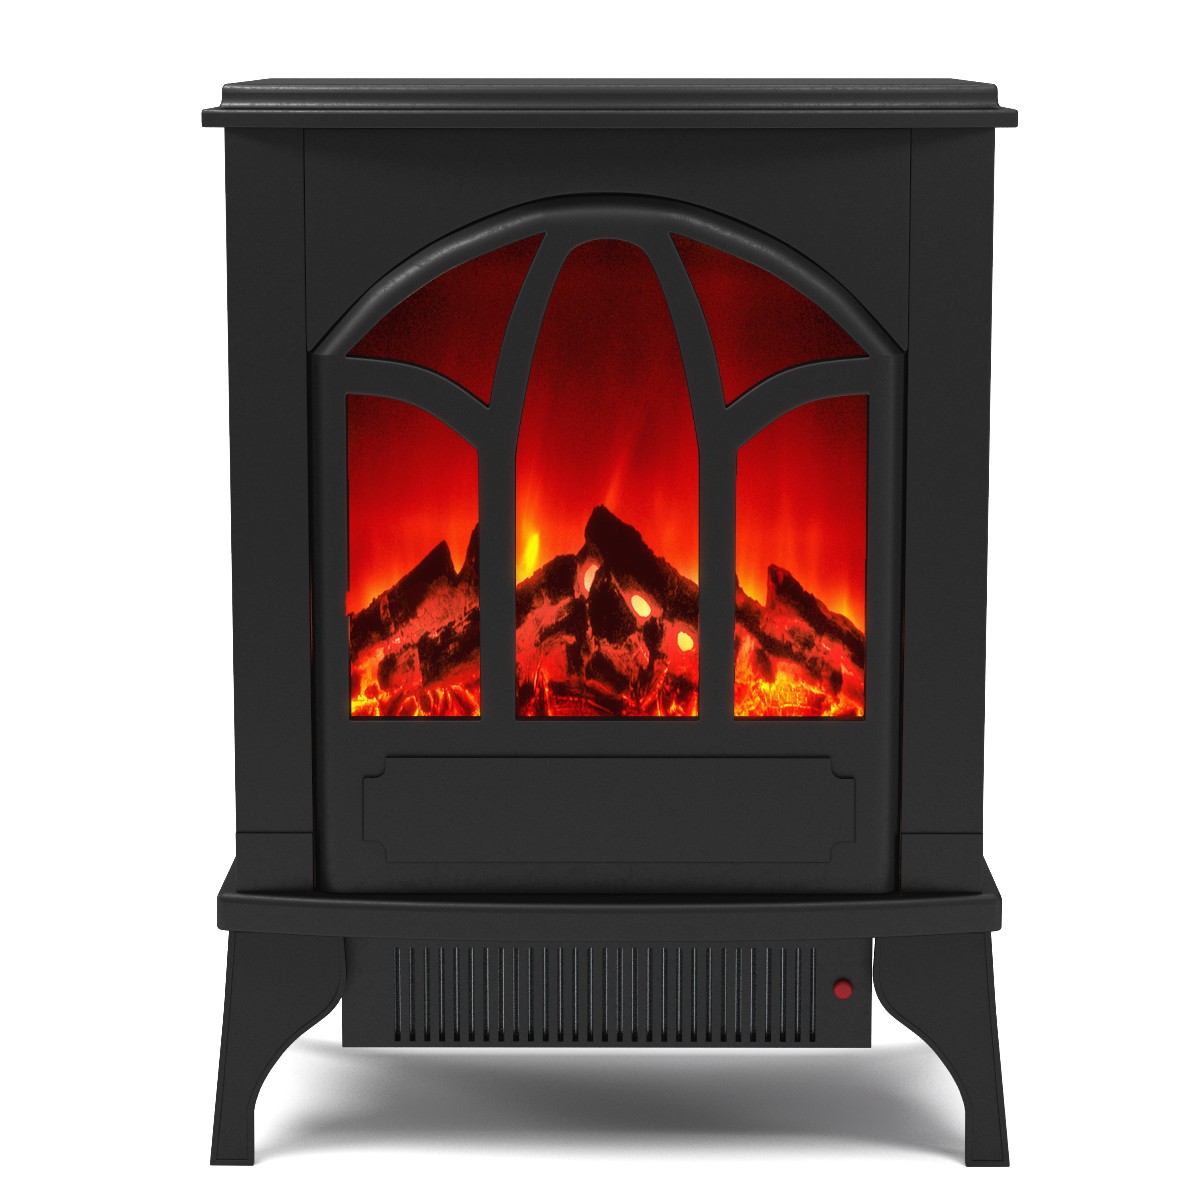 Regal Flame Phoenix Electric Fireplace Free Standing Portable Space Heater Stove Better than Wood Fireplaces, Gas Logs, Wall Mou